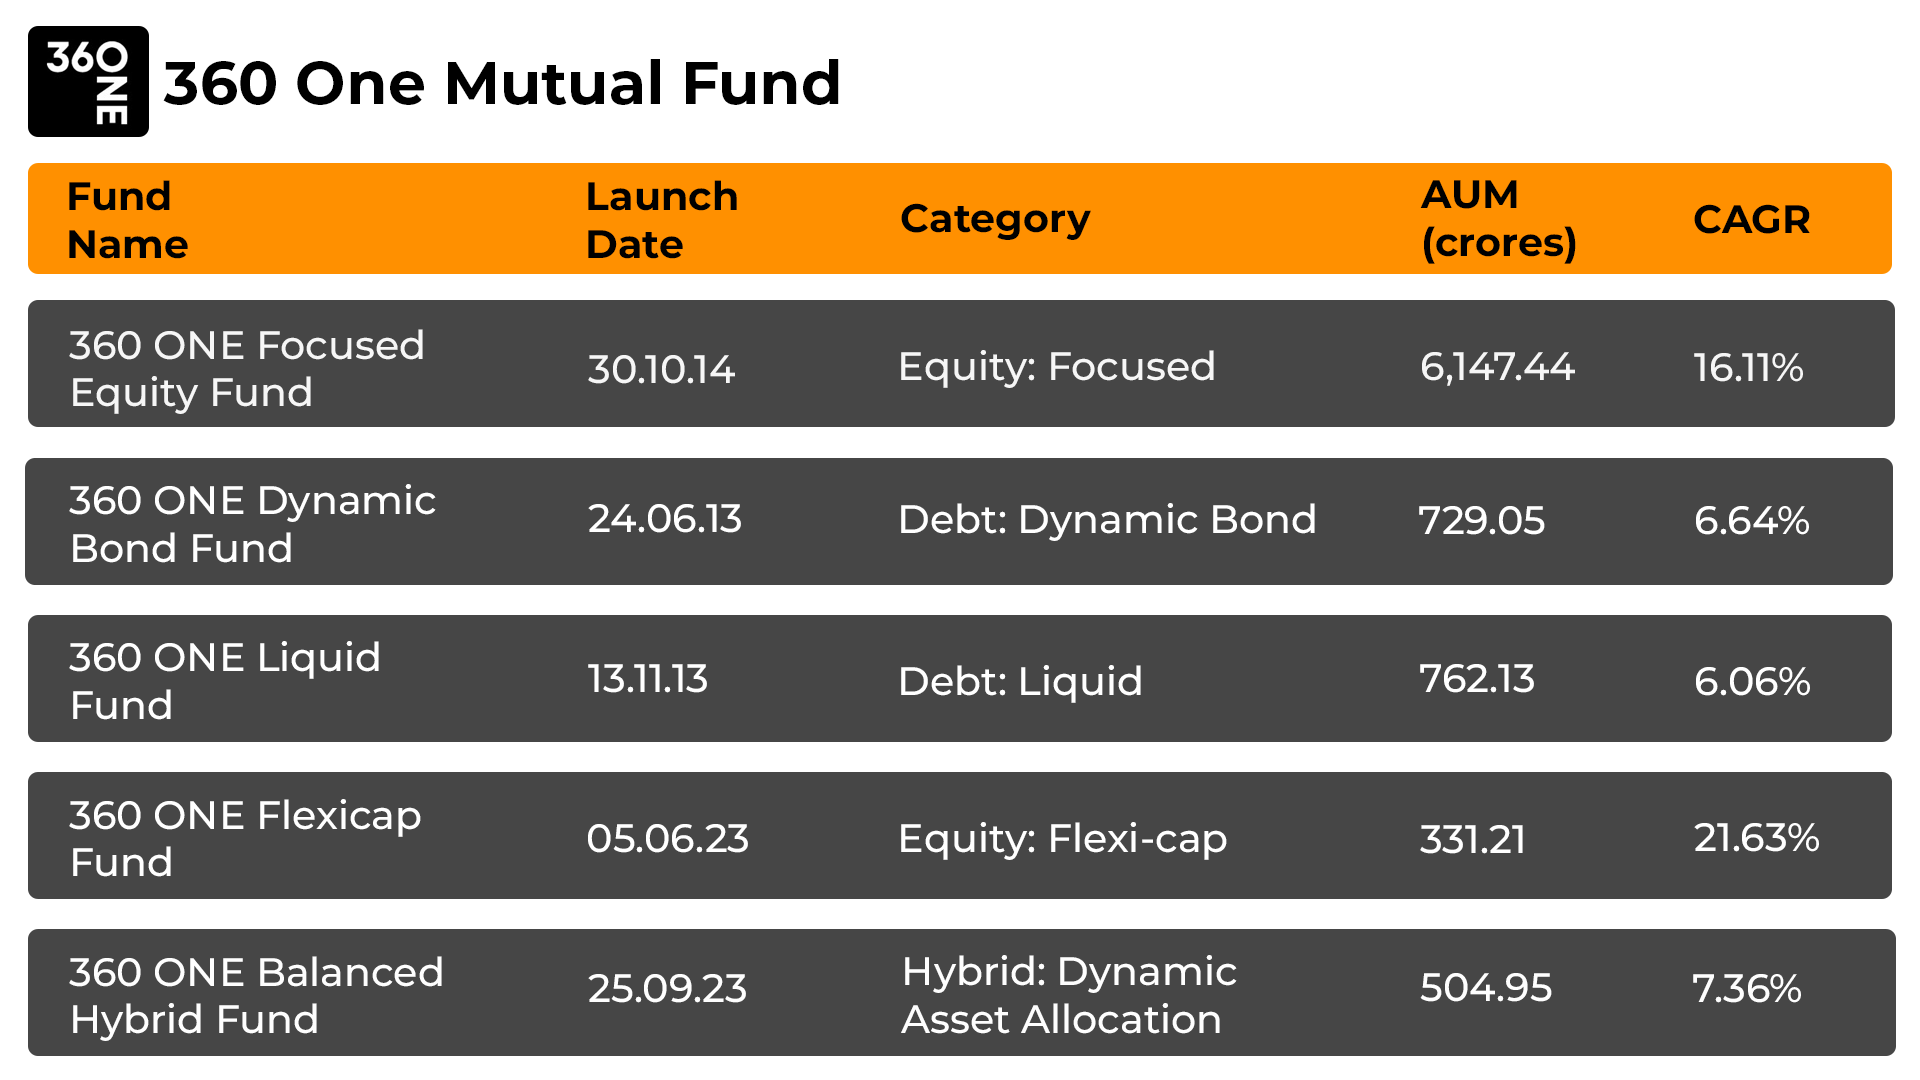 Top 5 360 ONE Mutual Fund